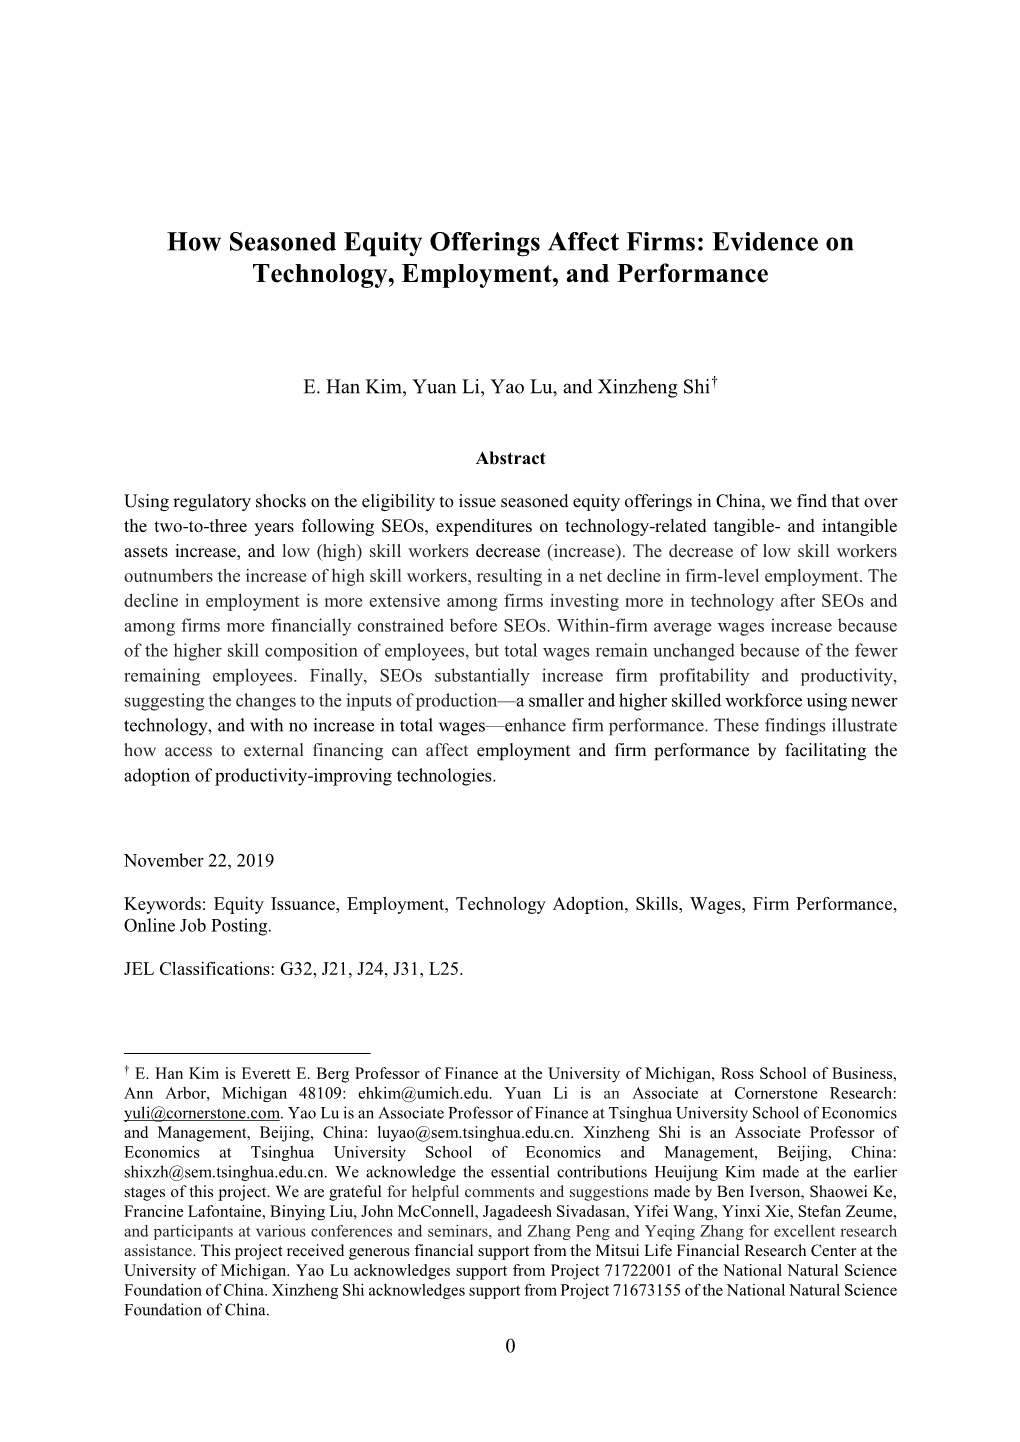 How Seasoned Equity Offerings Affect Firms: Evidence on Technology, Employment, and Performance